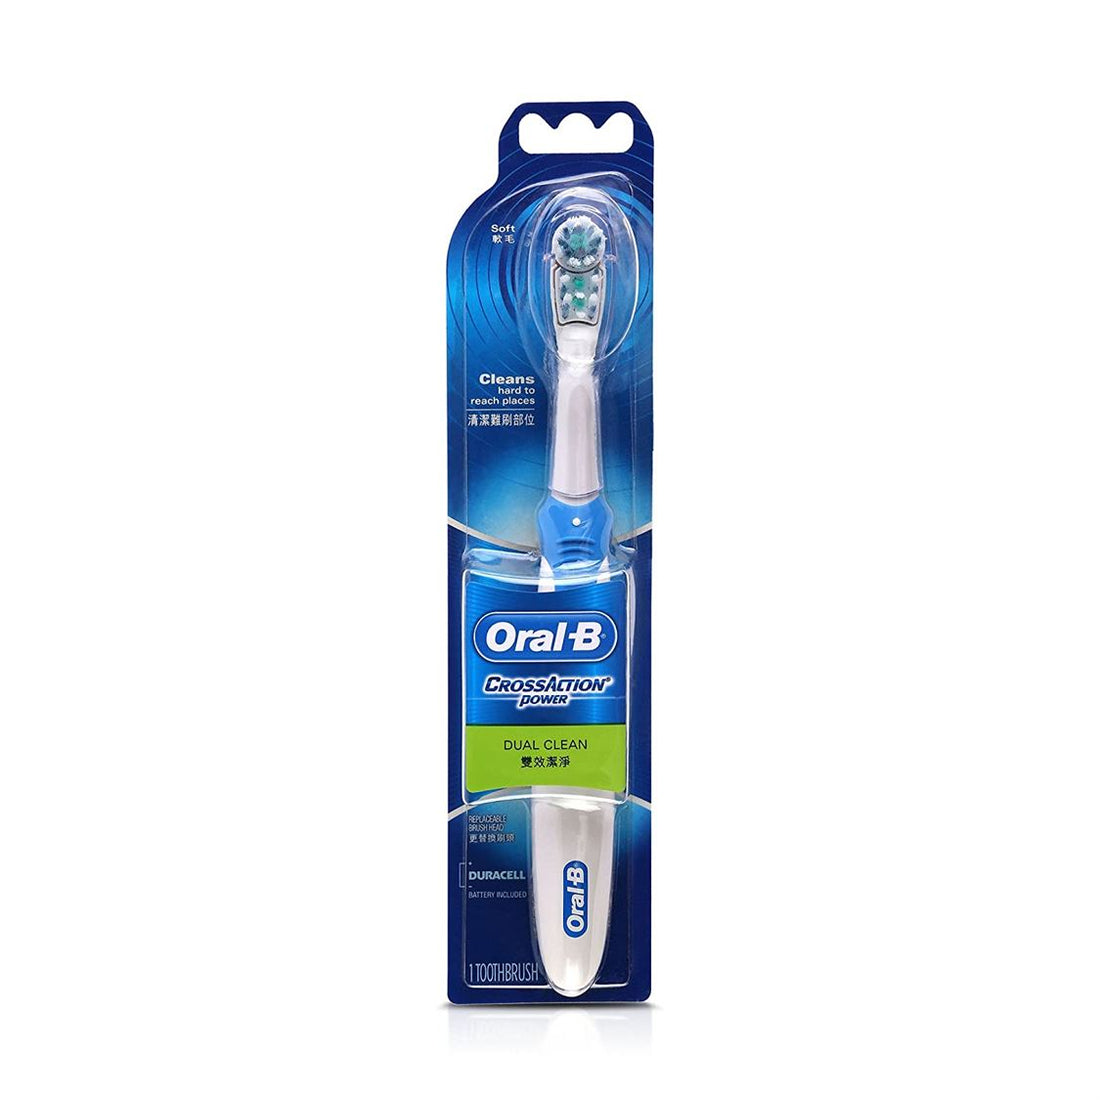 Oral-B Crossaction Power Toothbrush 1 unit